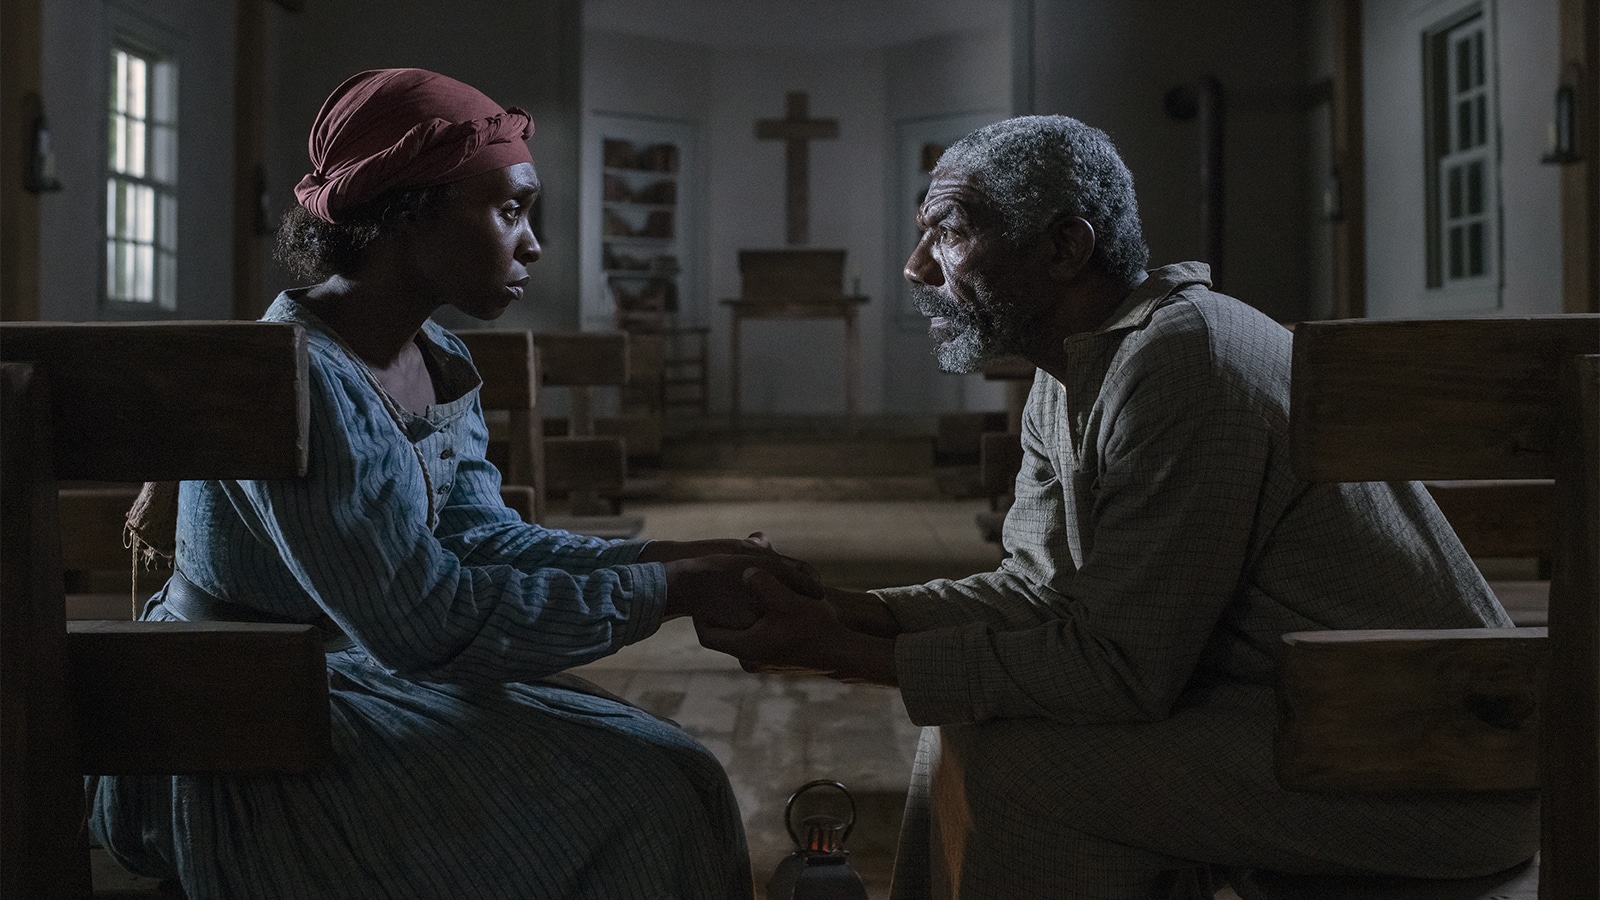 Harriet Tubman, in Movie and Real Life, Guided by Faith in